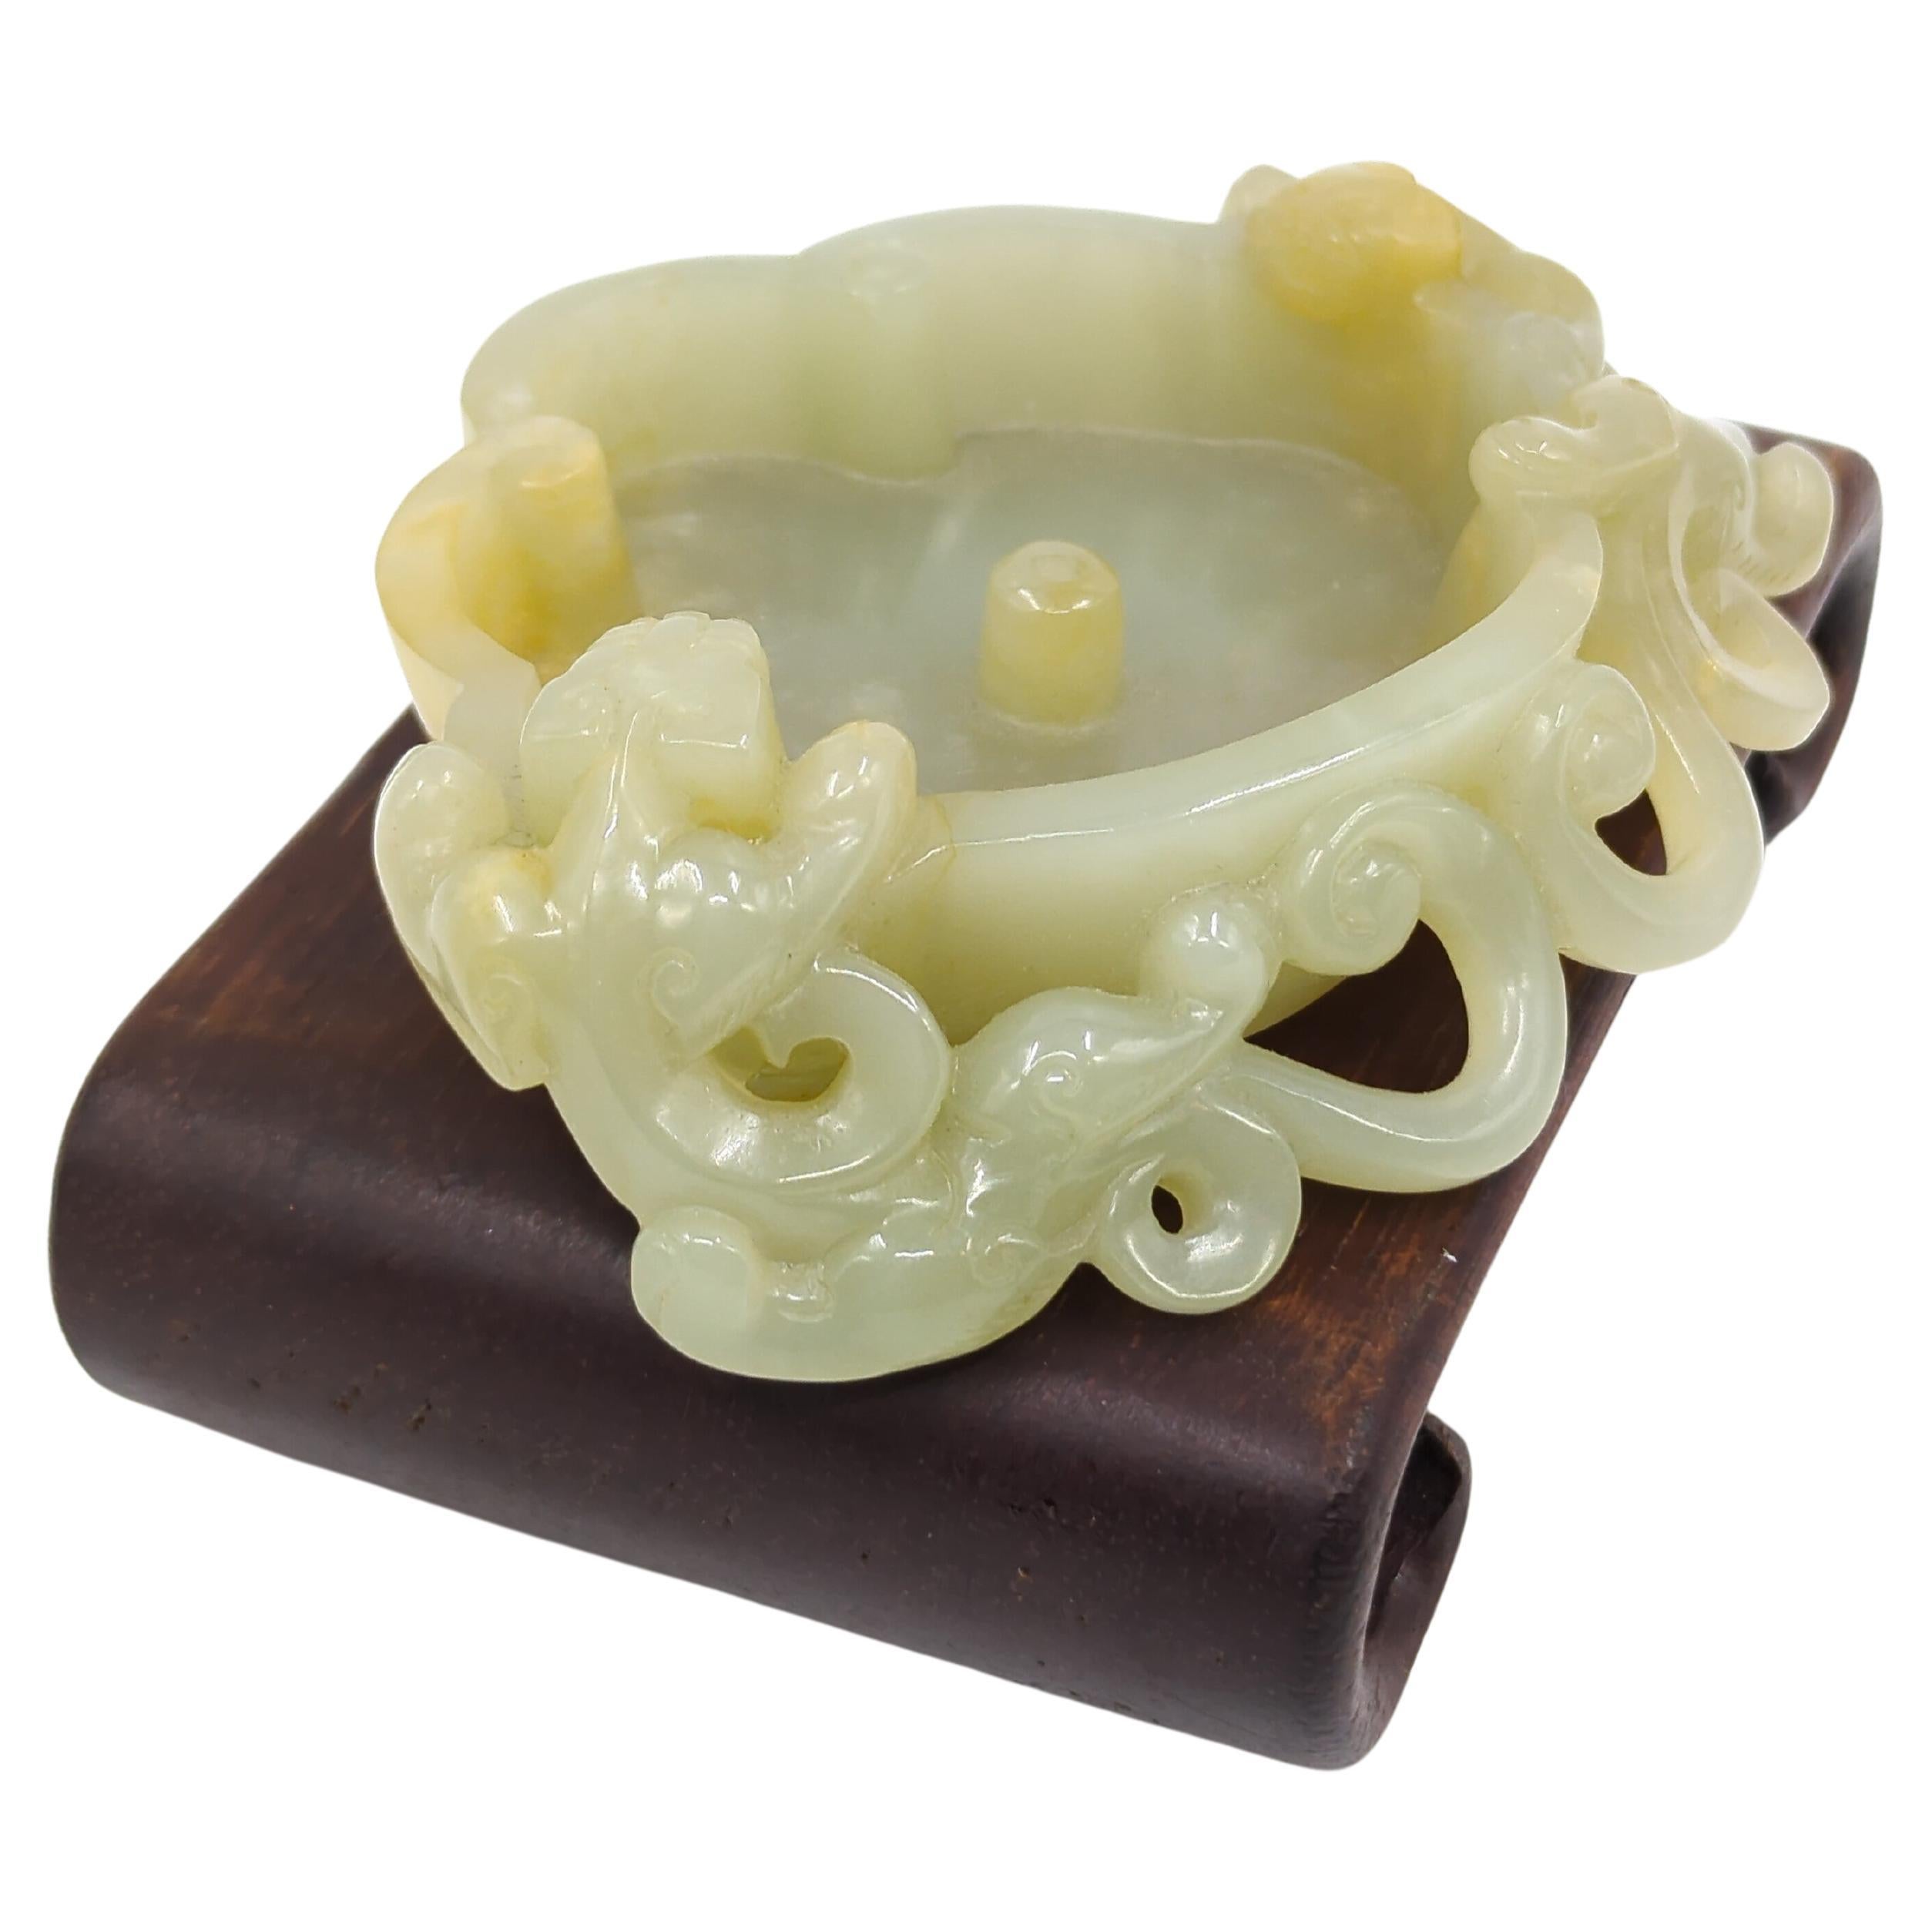 A fine antique Chinese hand carved jade brush wash, in ruyi head form, sides flanked by 2 climbing hydras, and bottom carved with three raised circles feet

Size: H: 32 mm W: 117 mm D: 93mm
Height on stand: 87.5 mm
Weight: 189 grams
circa 1850, Qing